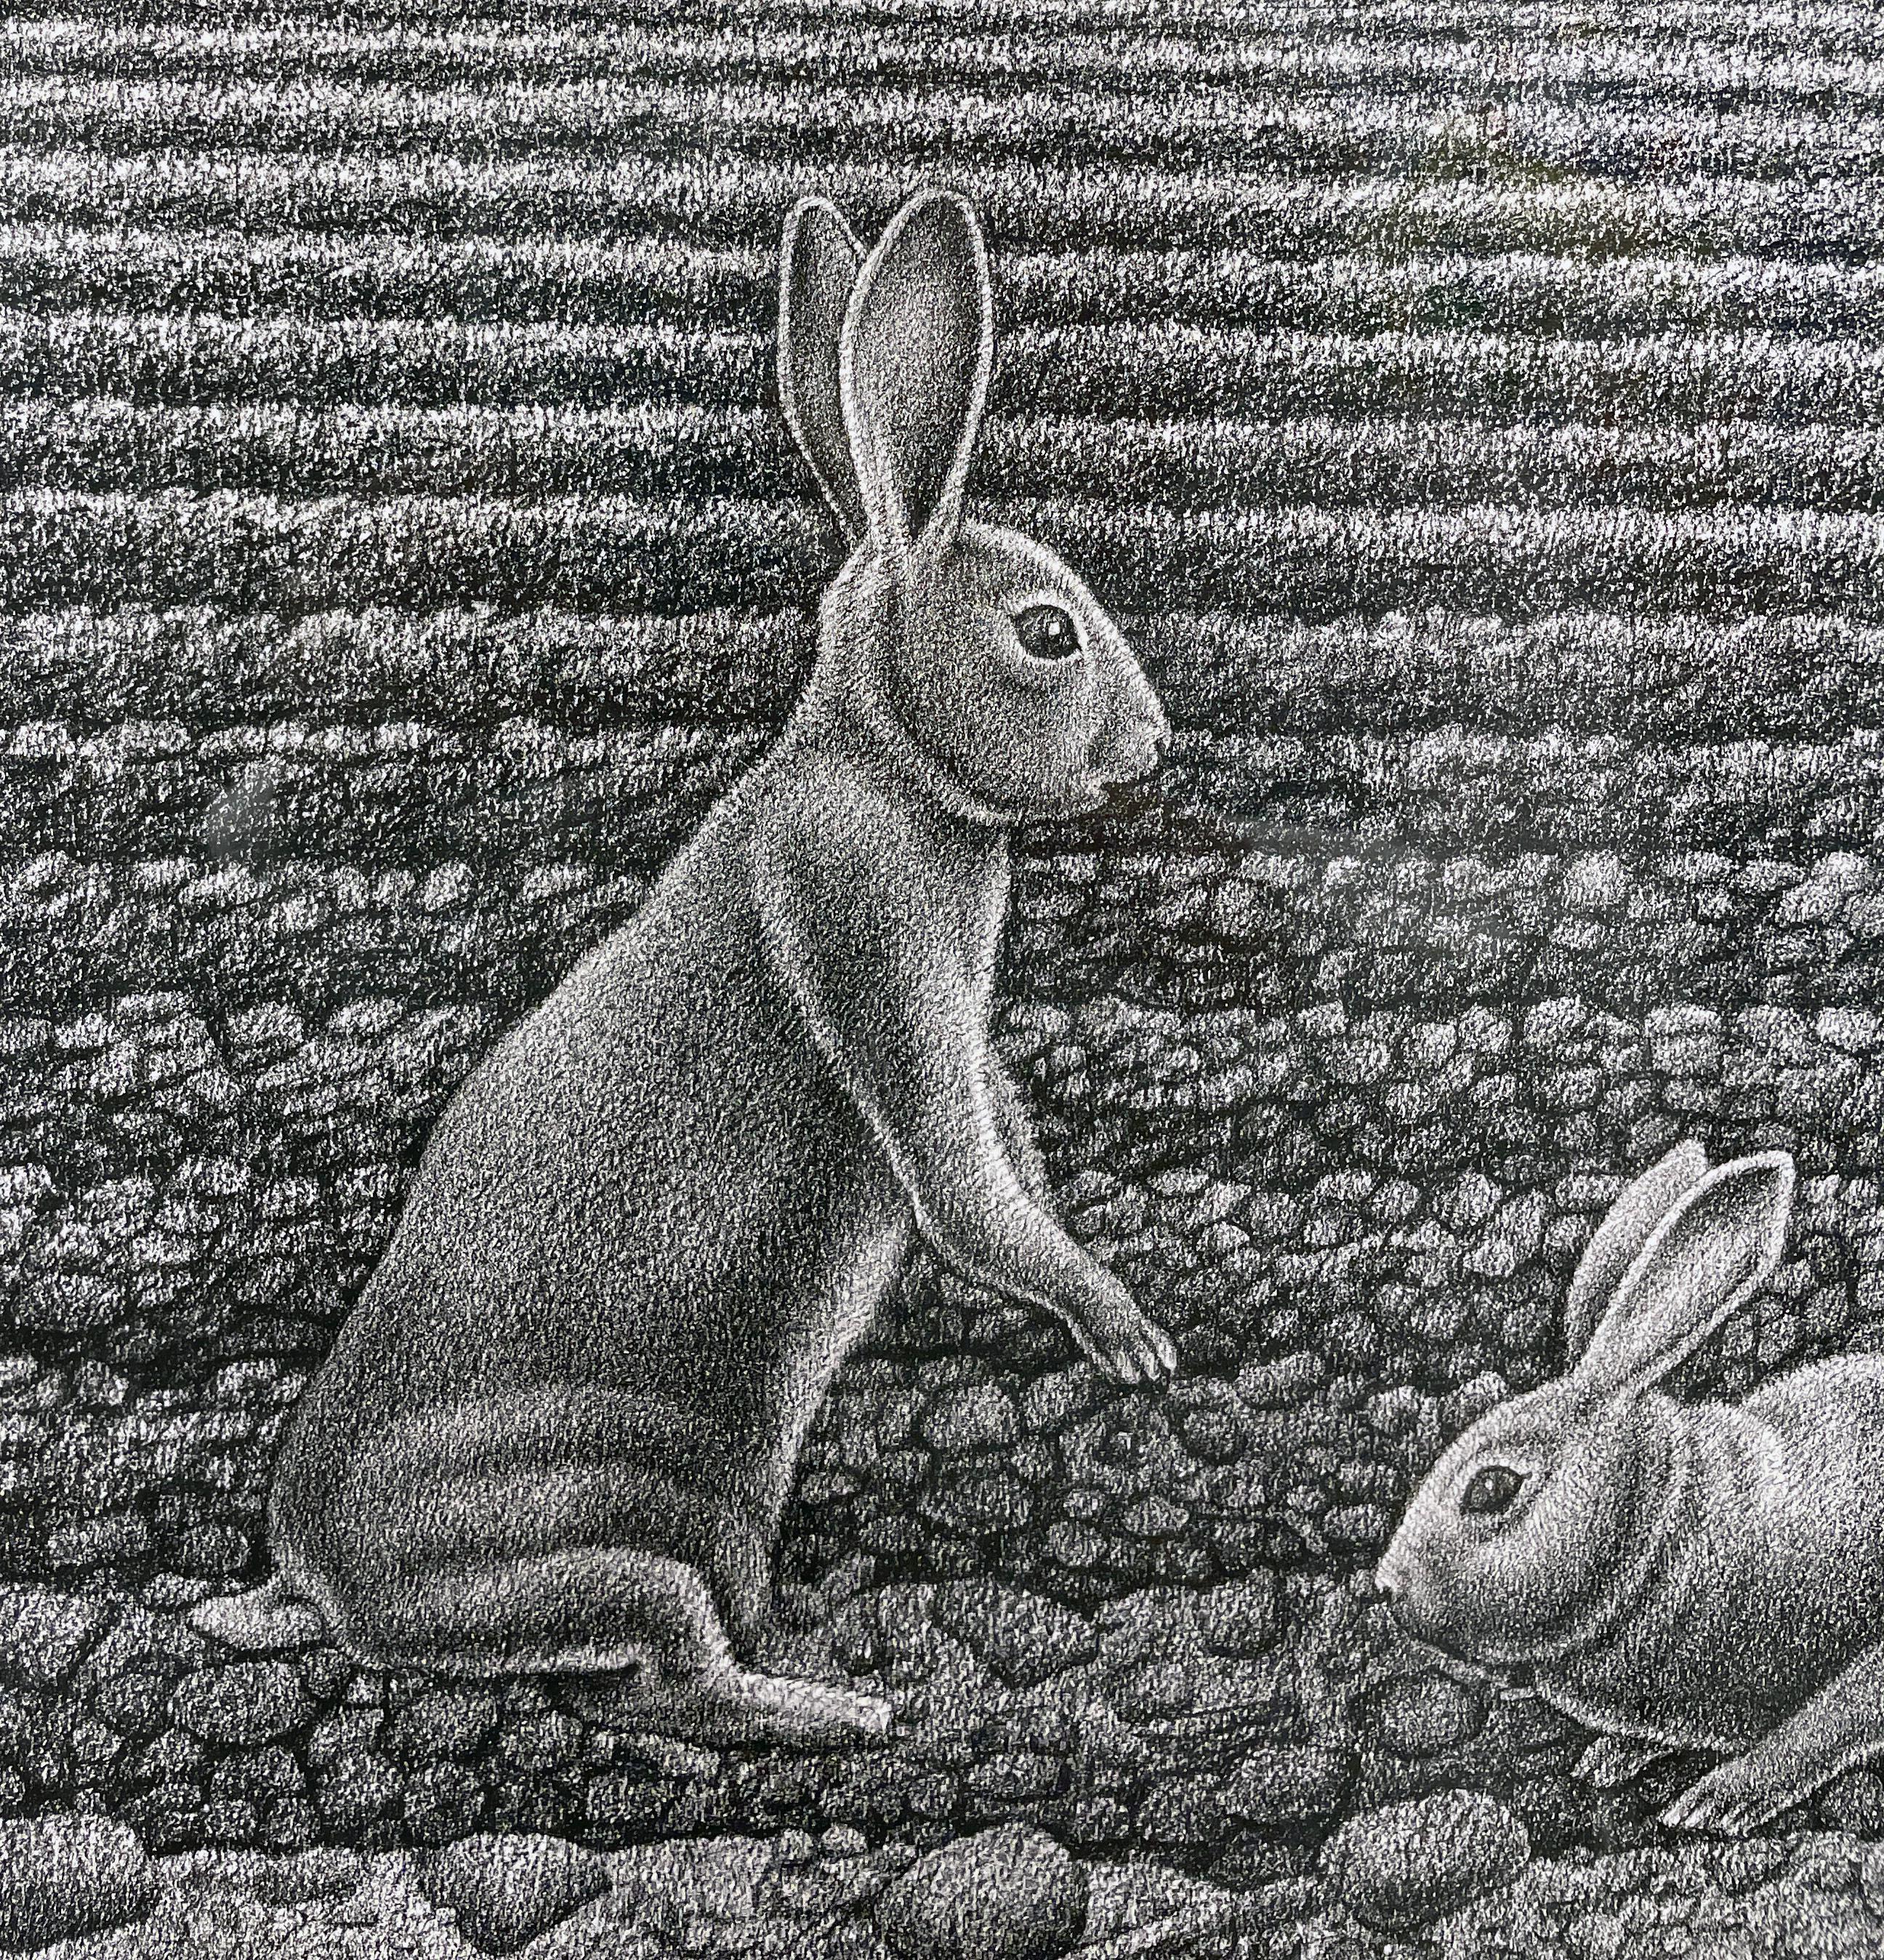 Glean - Landscape, Sown Field w/ Two Rabbits, Graphite, Archival Paper - Surrealist Painting by John Hrehov